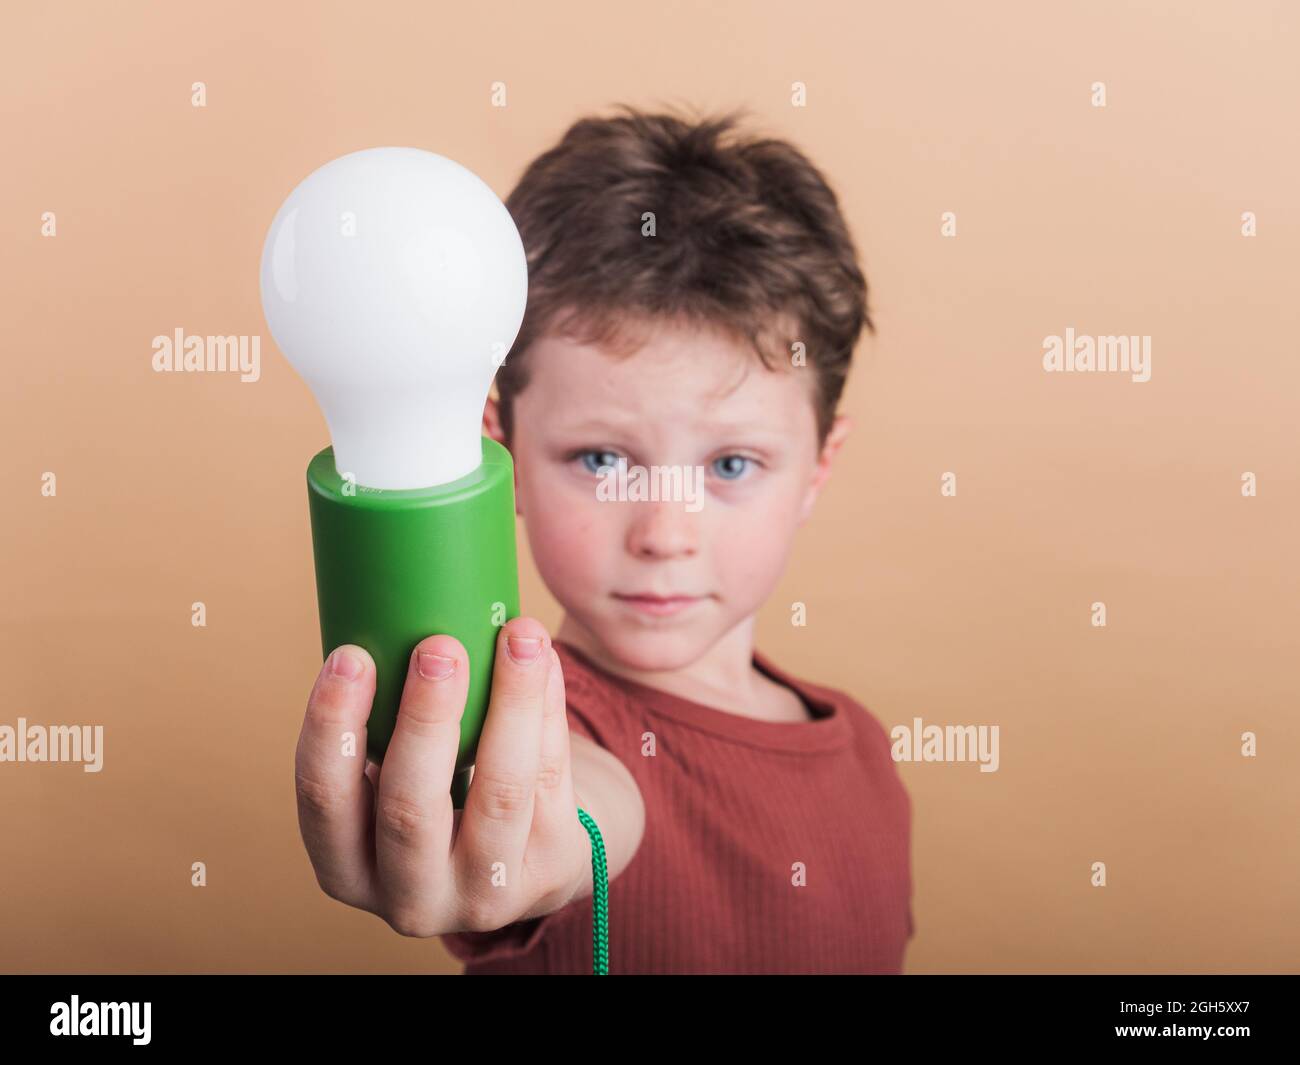 Pondering child in t shirt with plastic light bulb representing idea concept on beige background Stock Photo